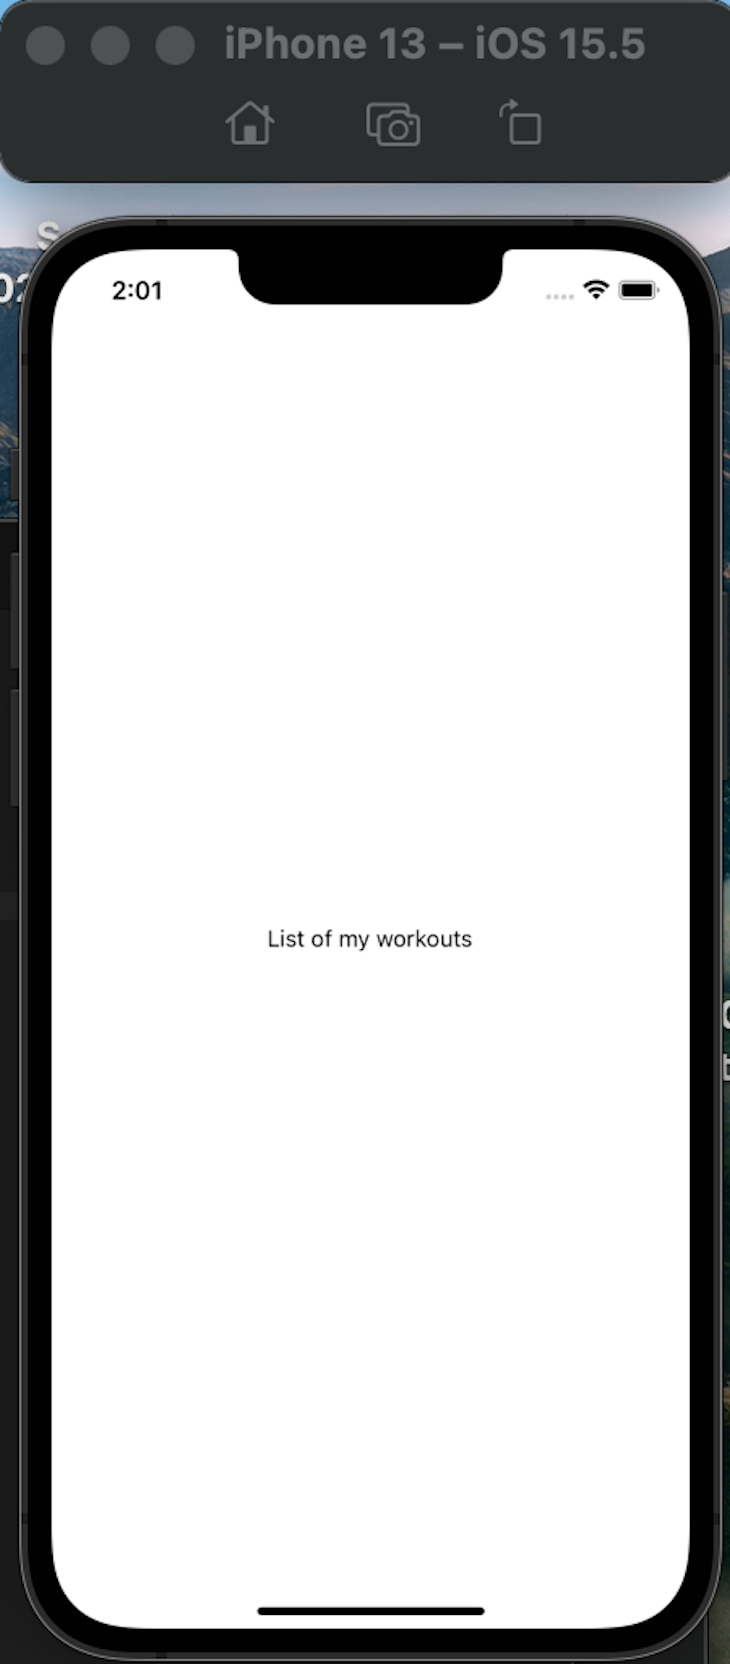 Connected React Native Backend App